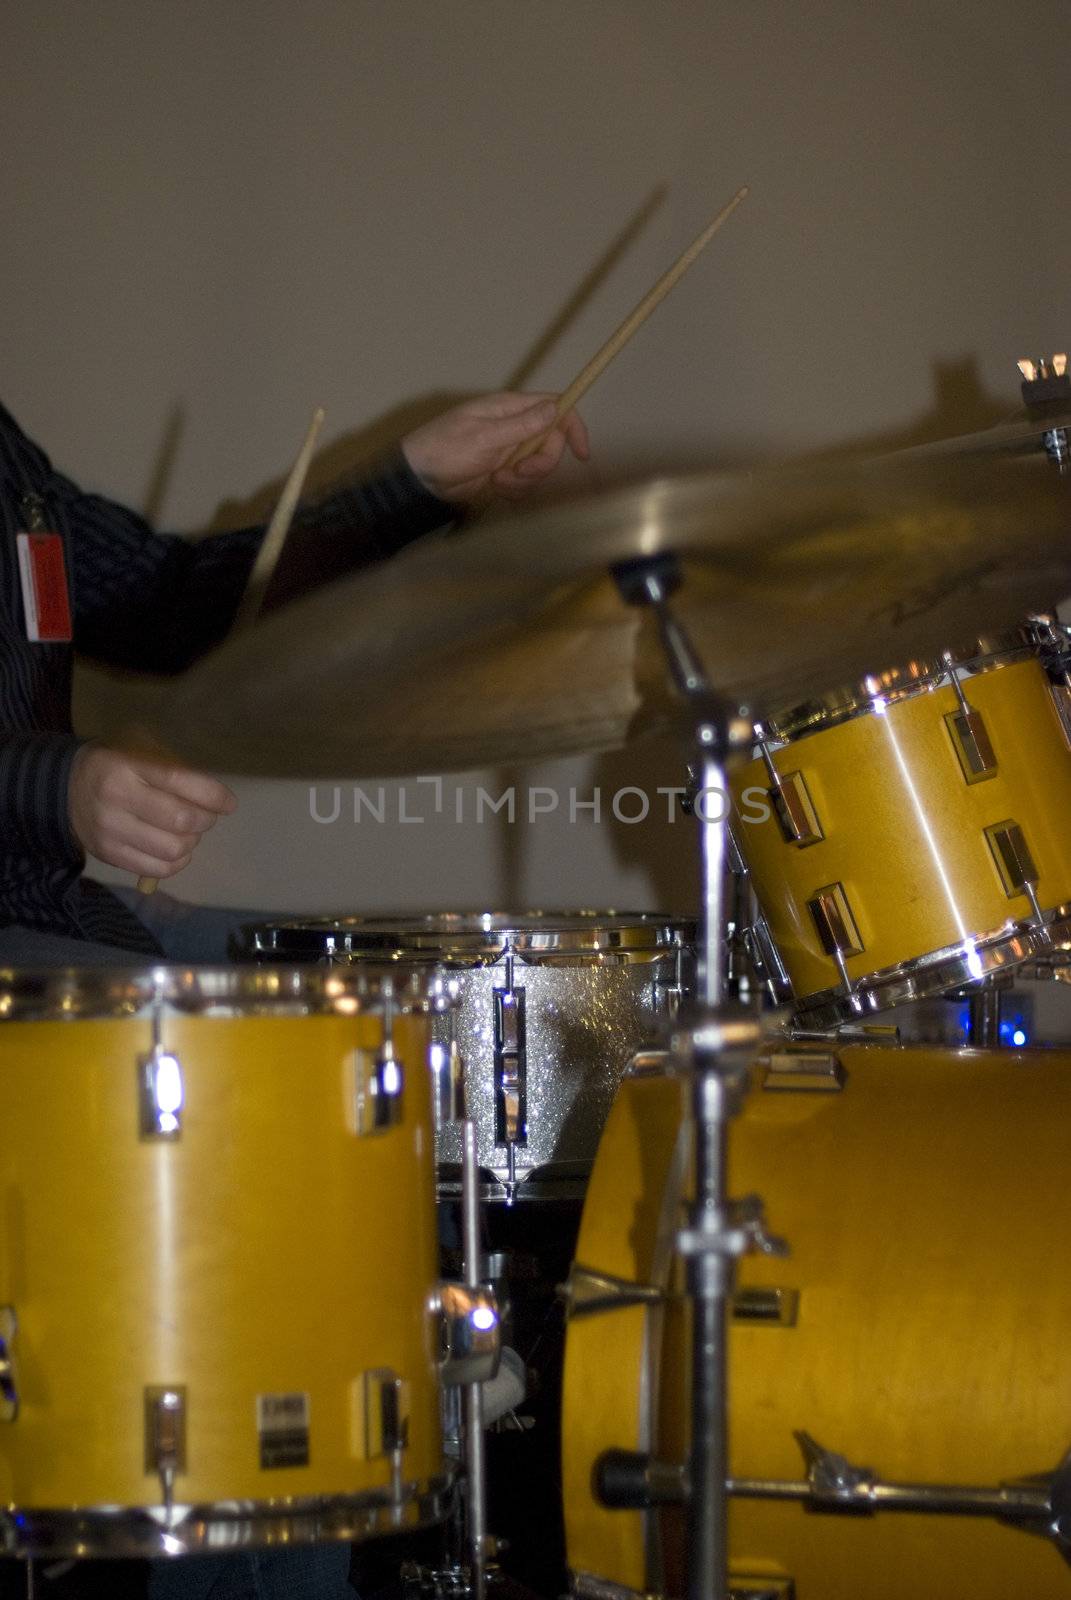 drummer by seattlephoto